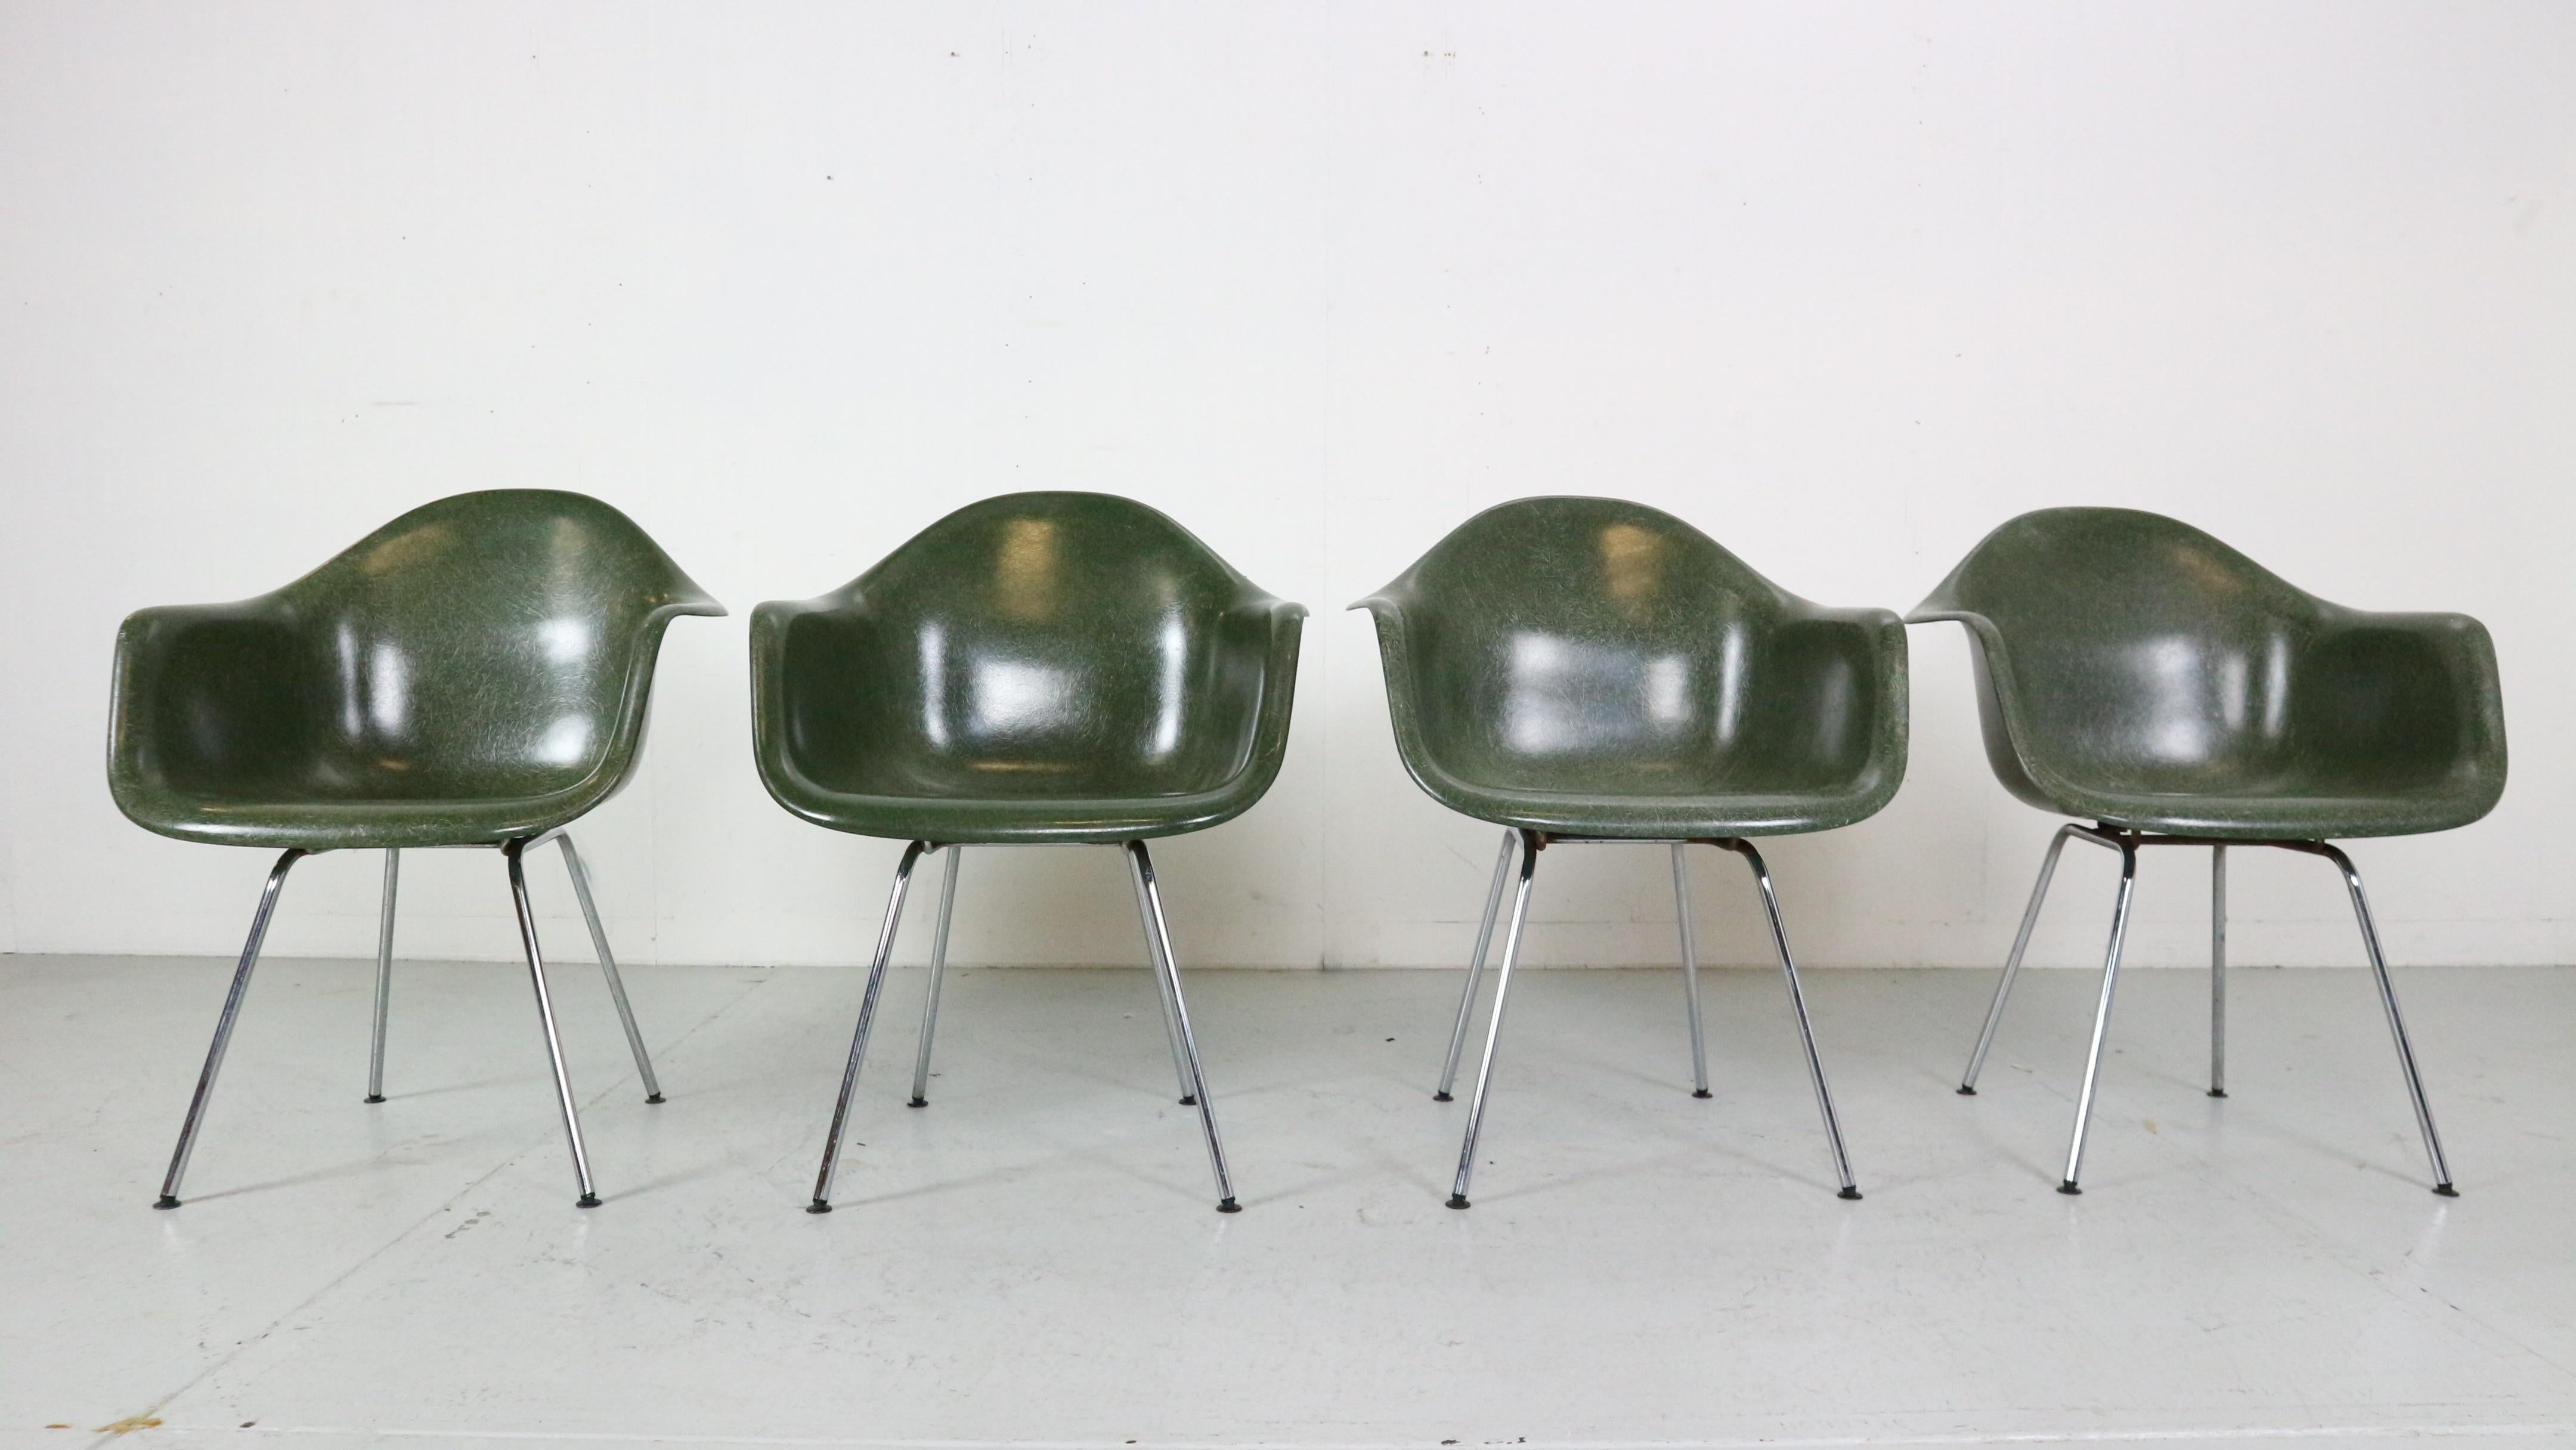 Set of 4 dinning chairs designed by Charles and Ray Eames and was manufactured in the United States by Herman Miller in 1955. 

The 